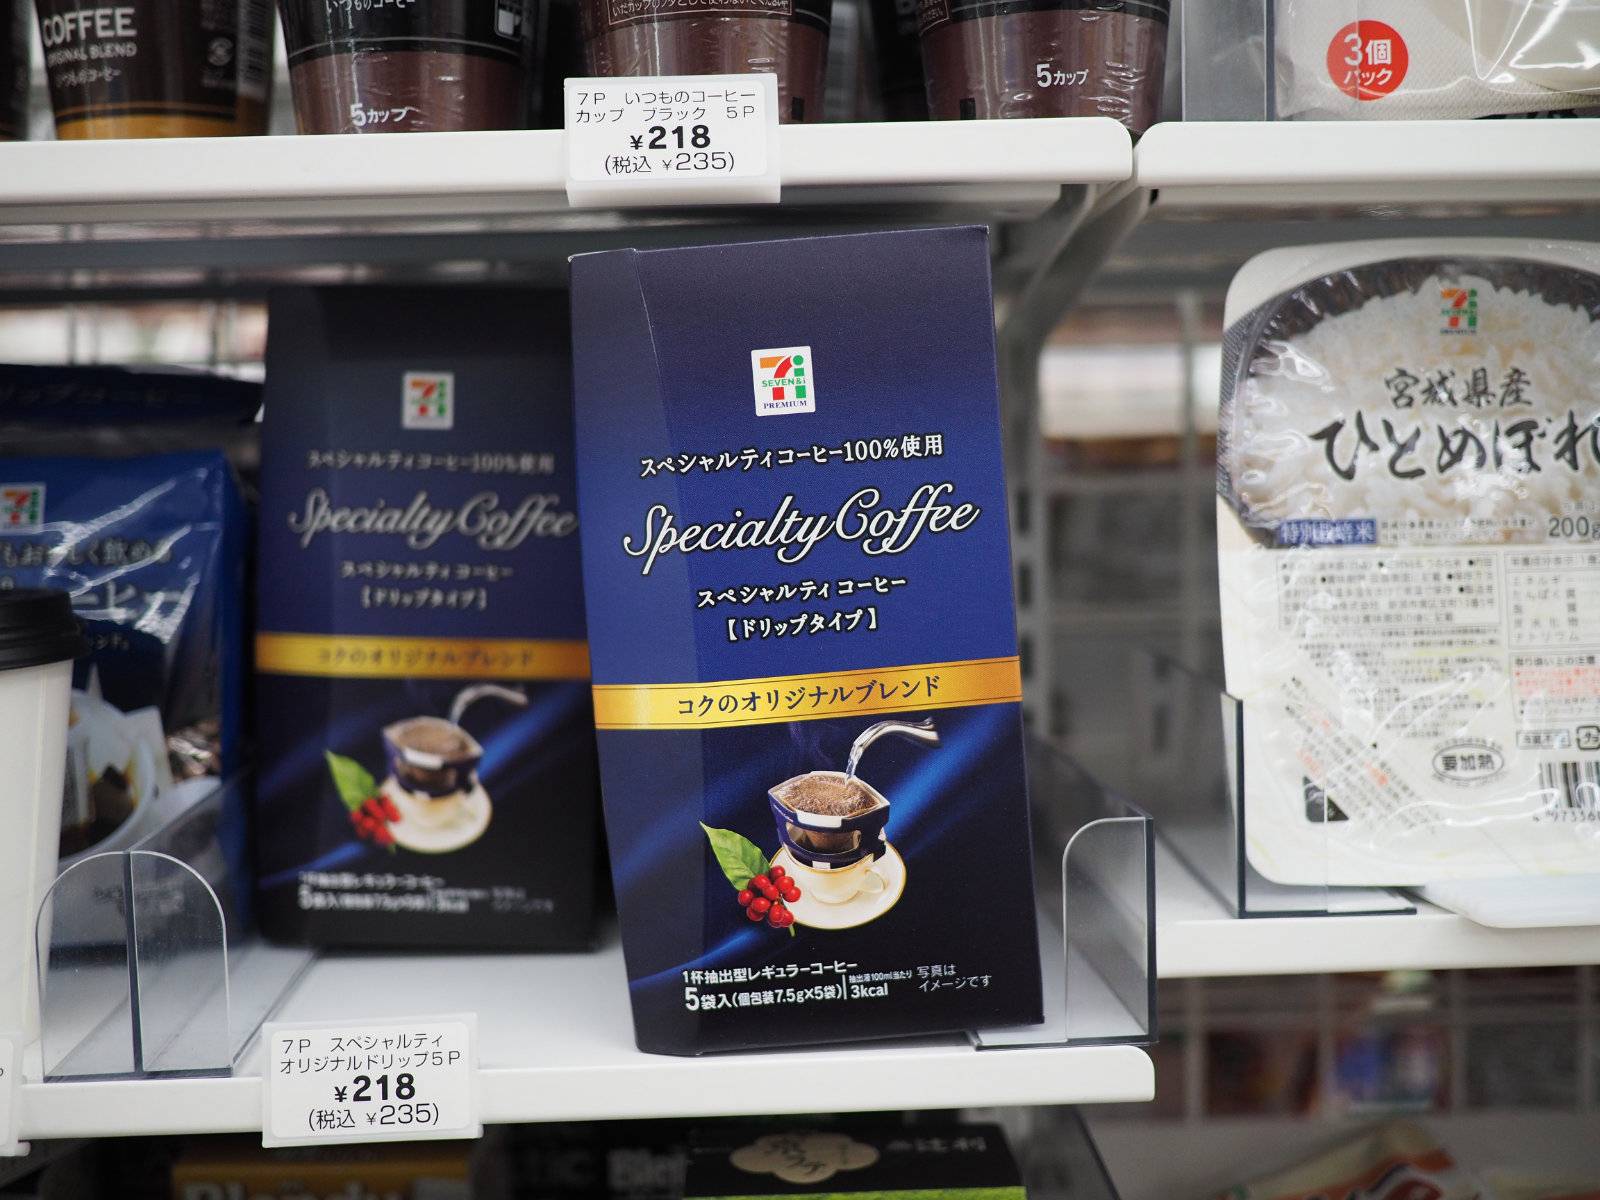 ‘Specialty coffee’ in a 7 Eleven